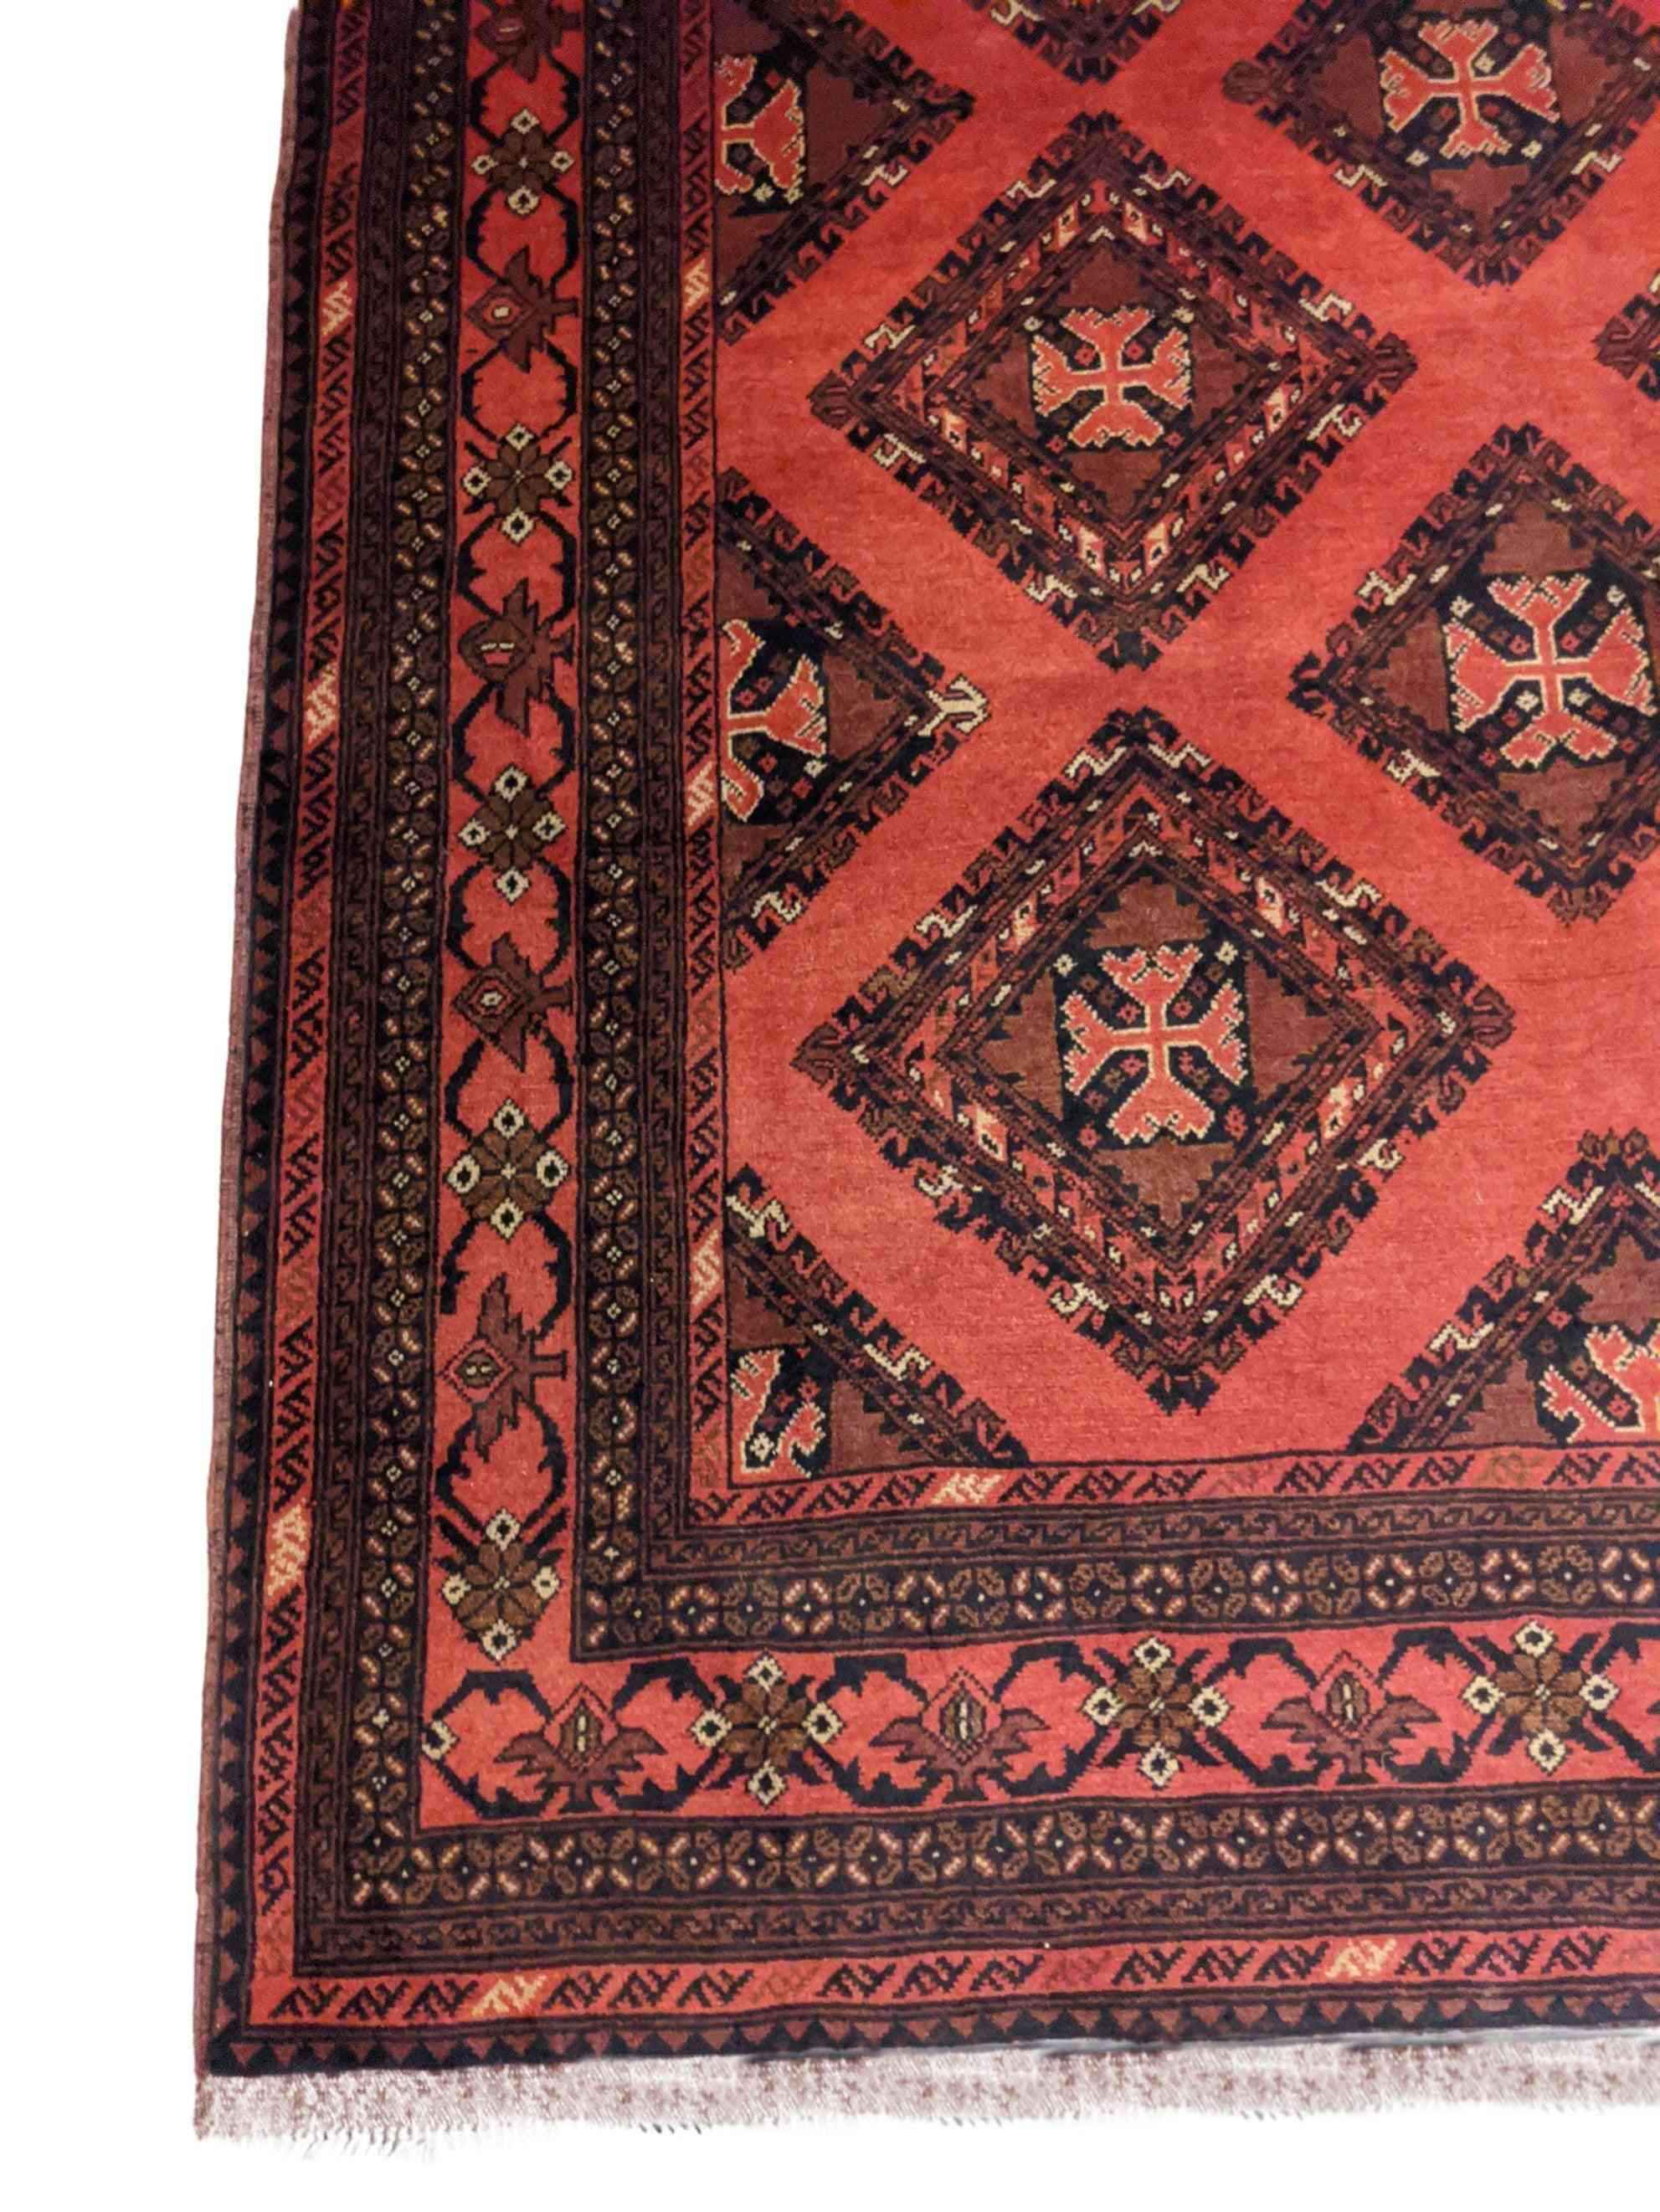 200 x 156 cm mohammadi Traditional Red Rug - Rugmaster